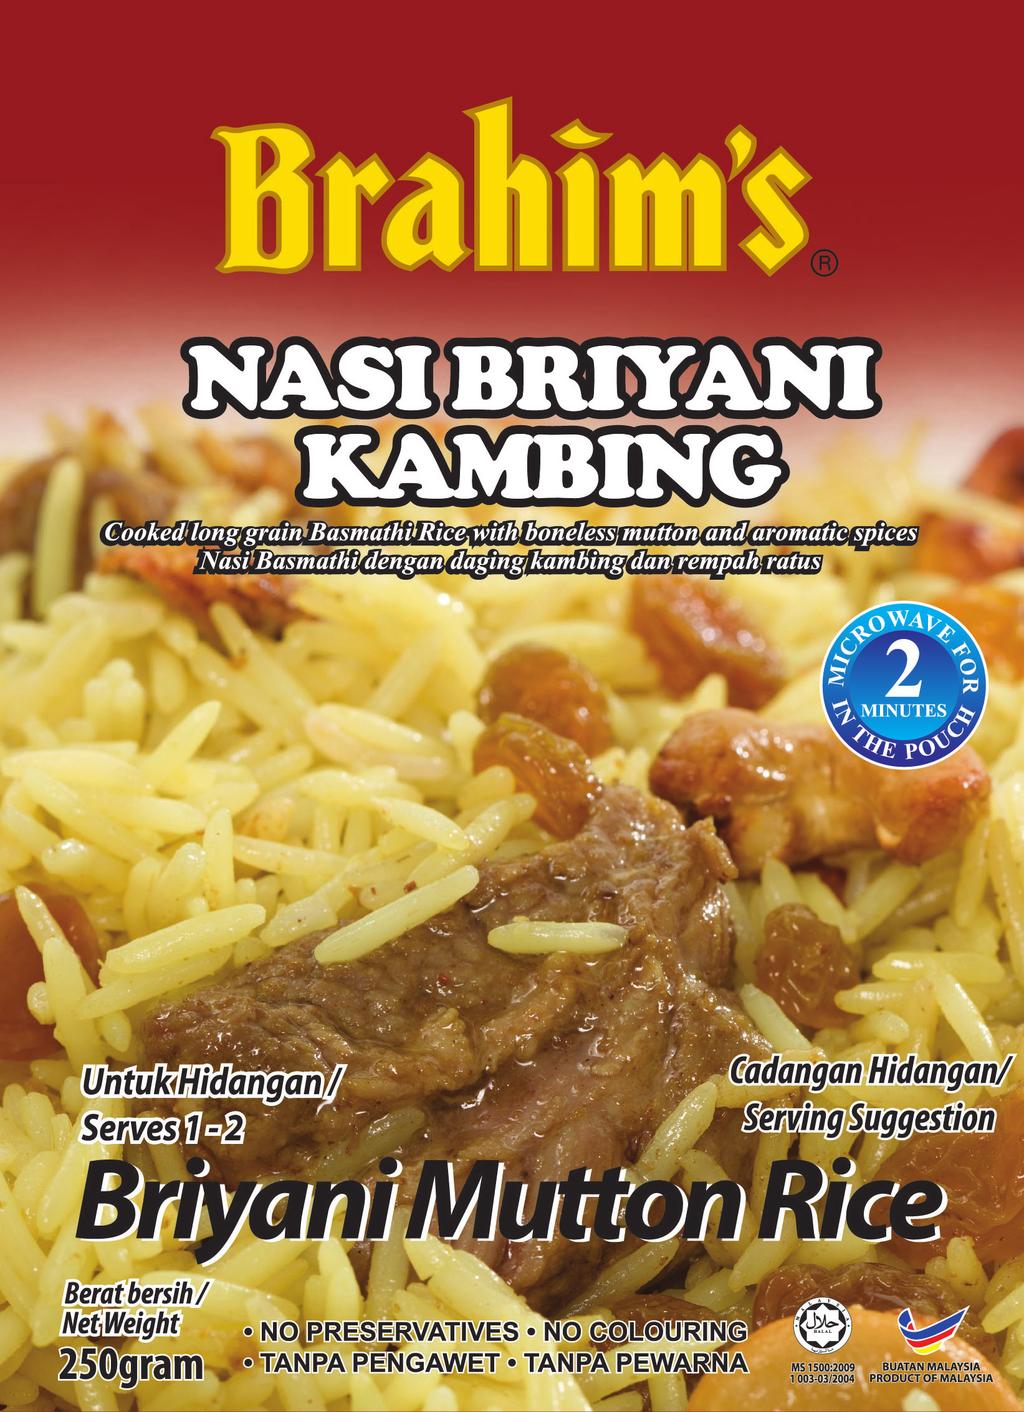 BRAHIM'S MEALS READY-TO-EAT RICE (MRE) - PRODUCT SPECIFICATIONS CM CM CM 50G 4 50G 4 50G 4 30G 4 50G Units Serving Size 4 50G 4 50G Tomato Rice 4 Briyani Mutton Rice Chicken Fried Rice Fried Rice